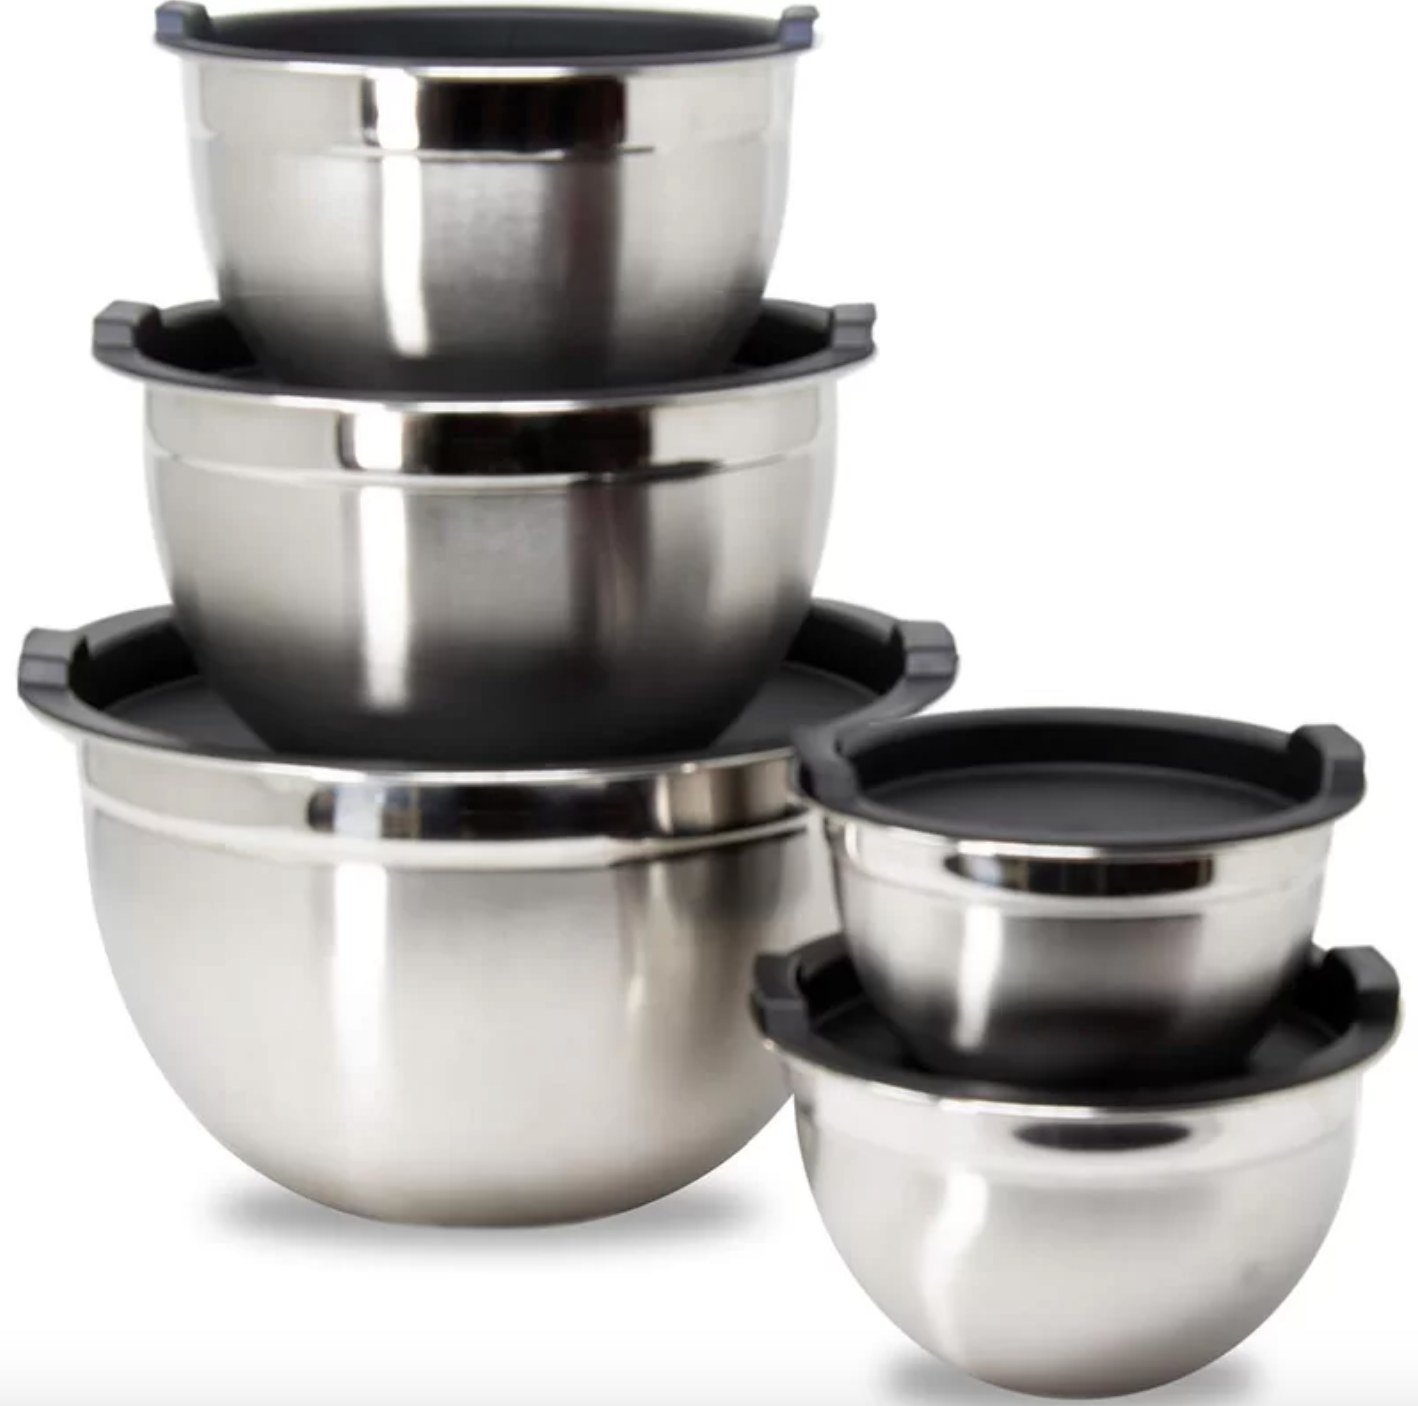 The set of five stainless steel mixing bowls with lids 